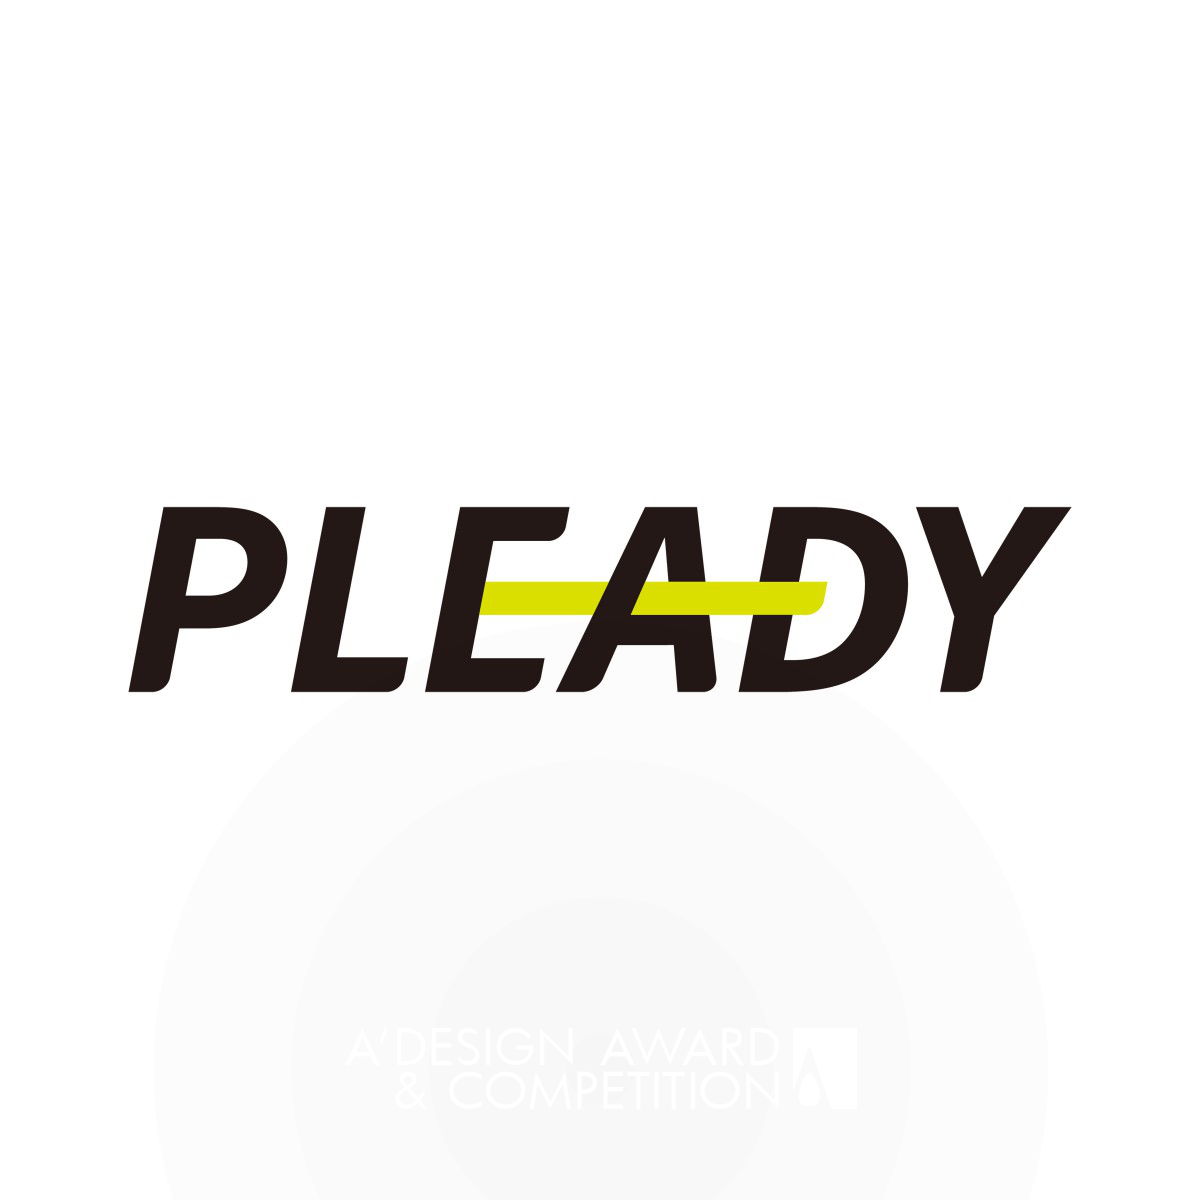 Pleady Brand Elements and Communication Tools by Katsumi Tamura